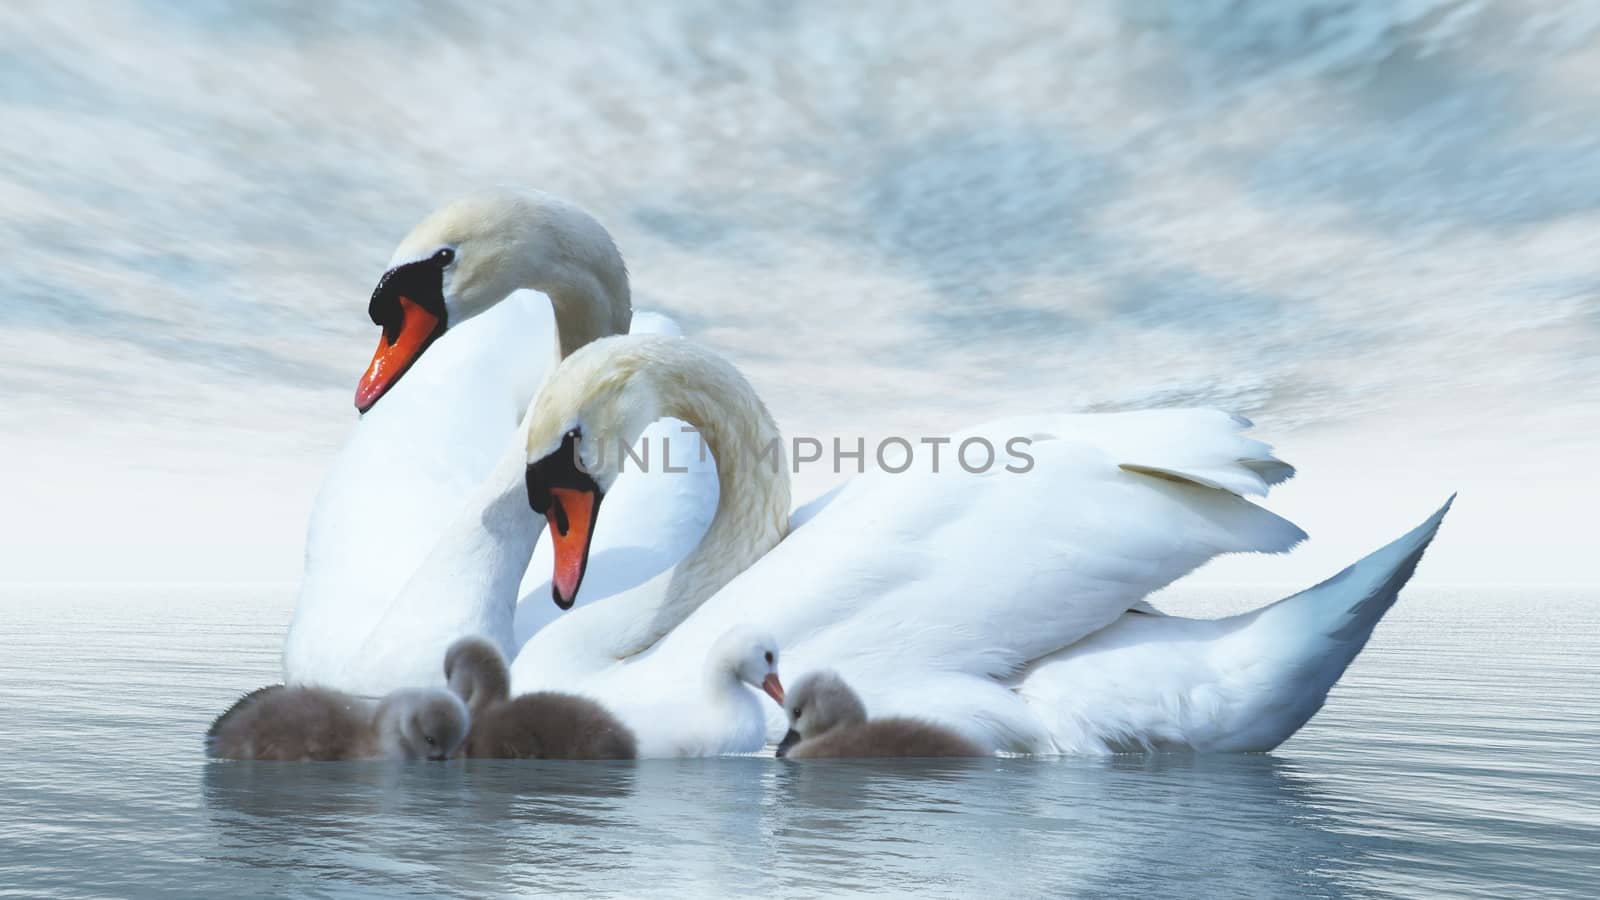 Swan family floating over by blue day - 3D render